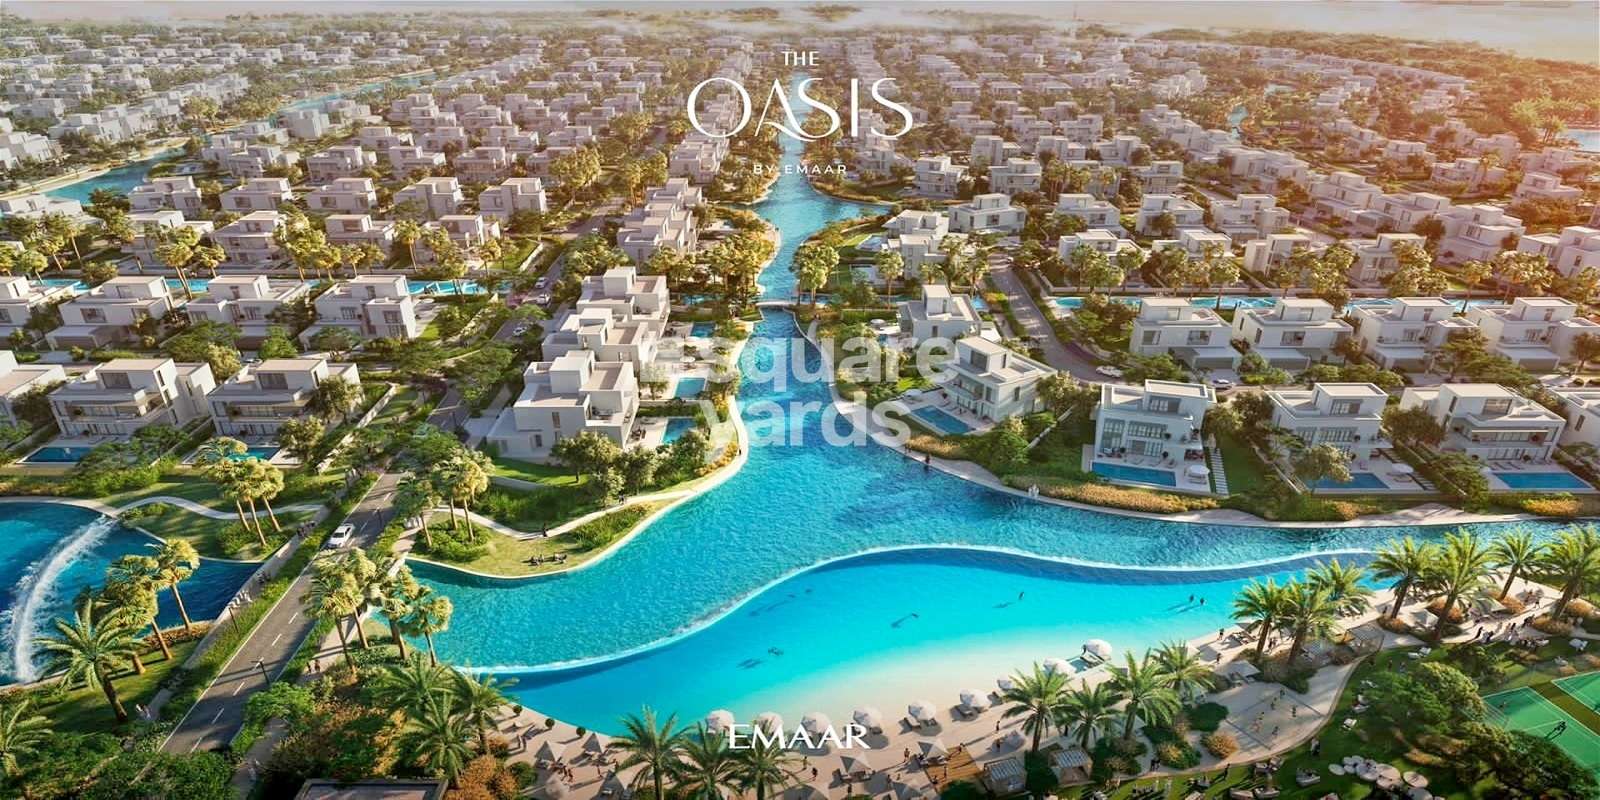 Emaar The Oasis Cover Image